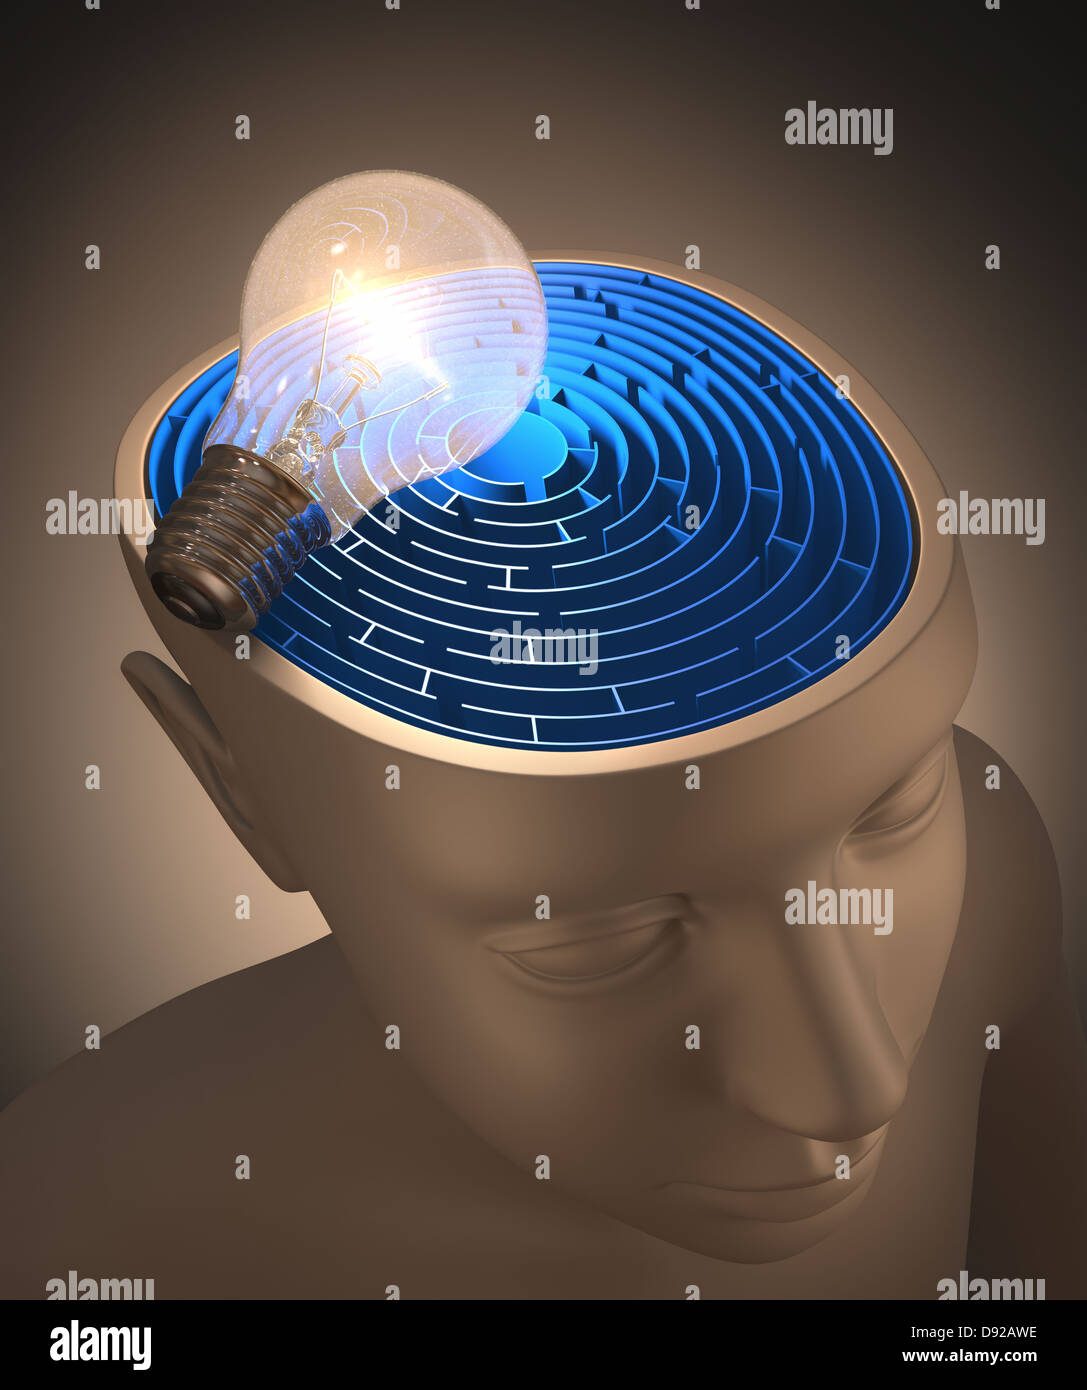 Labyrinth inside of the head being lit by a lamp. Stock Photo